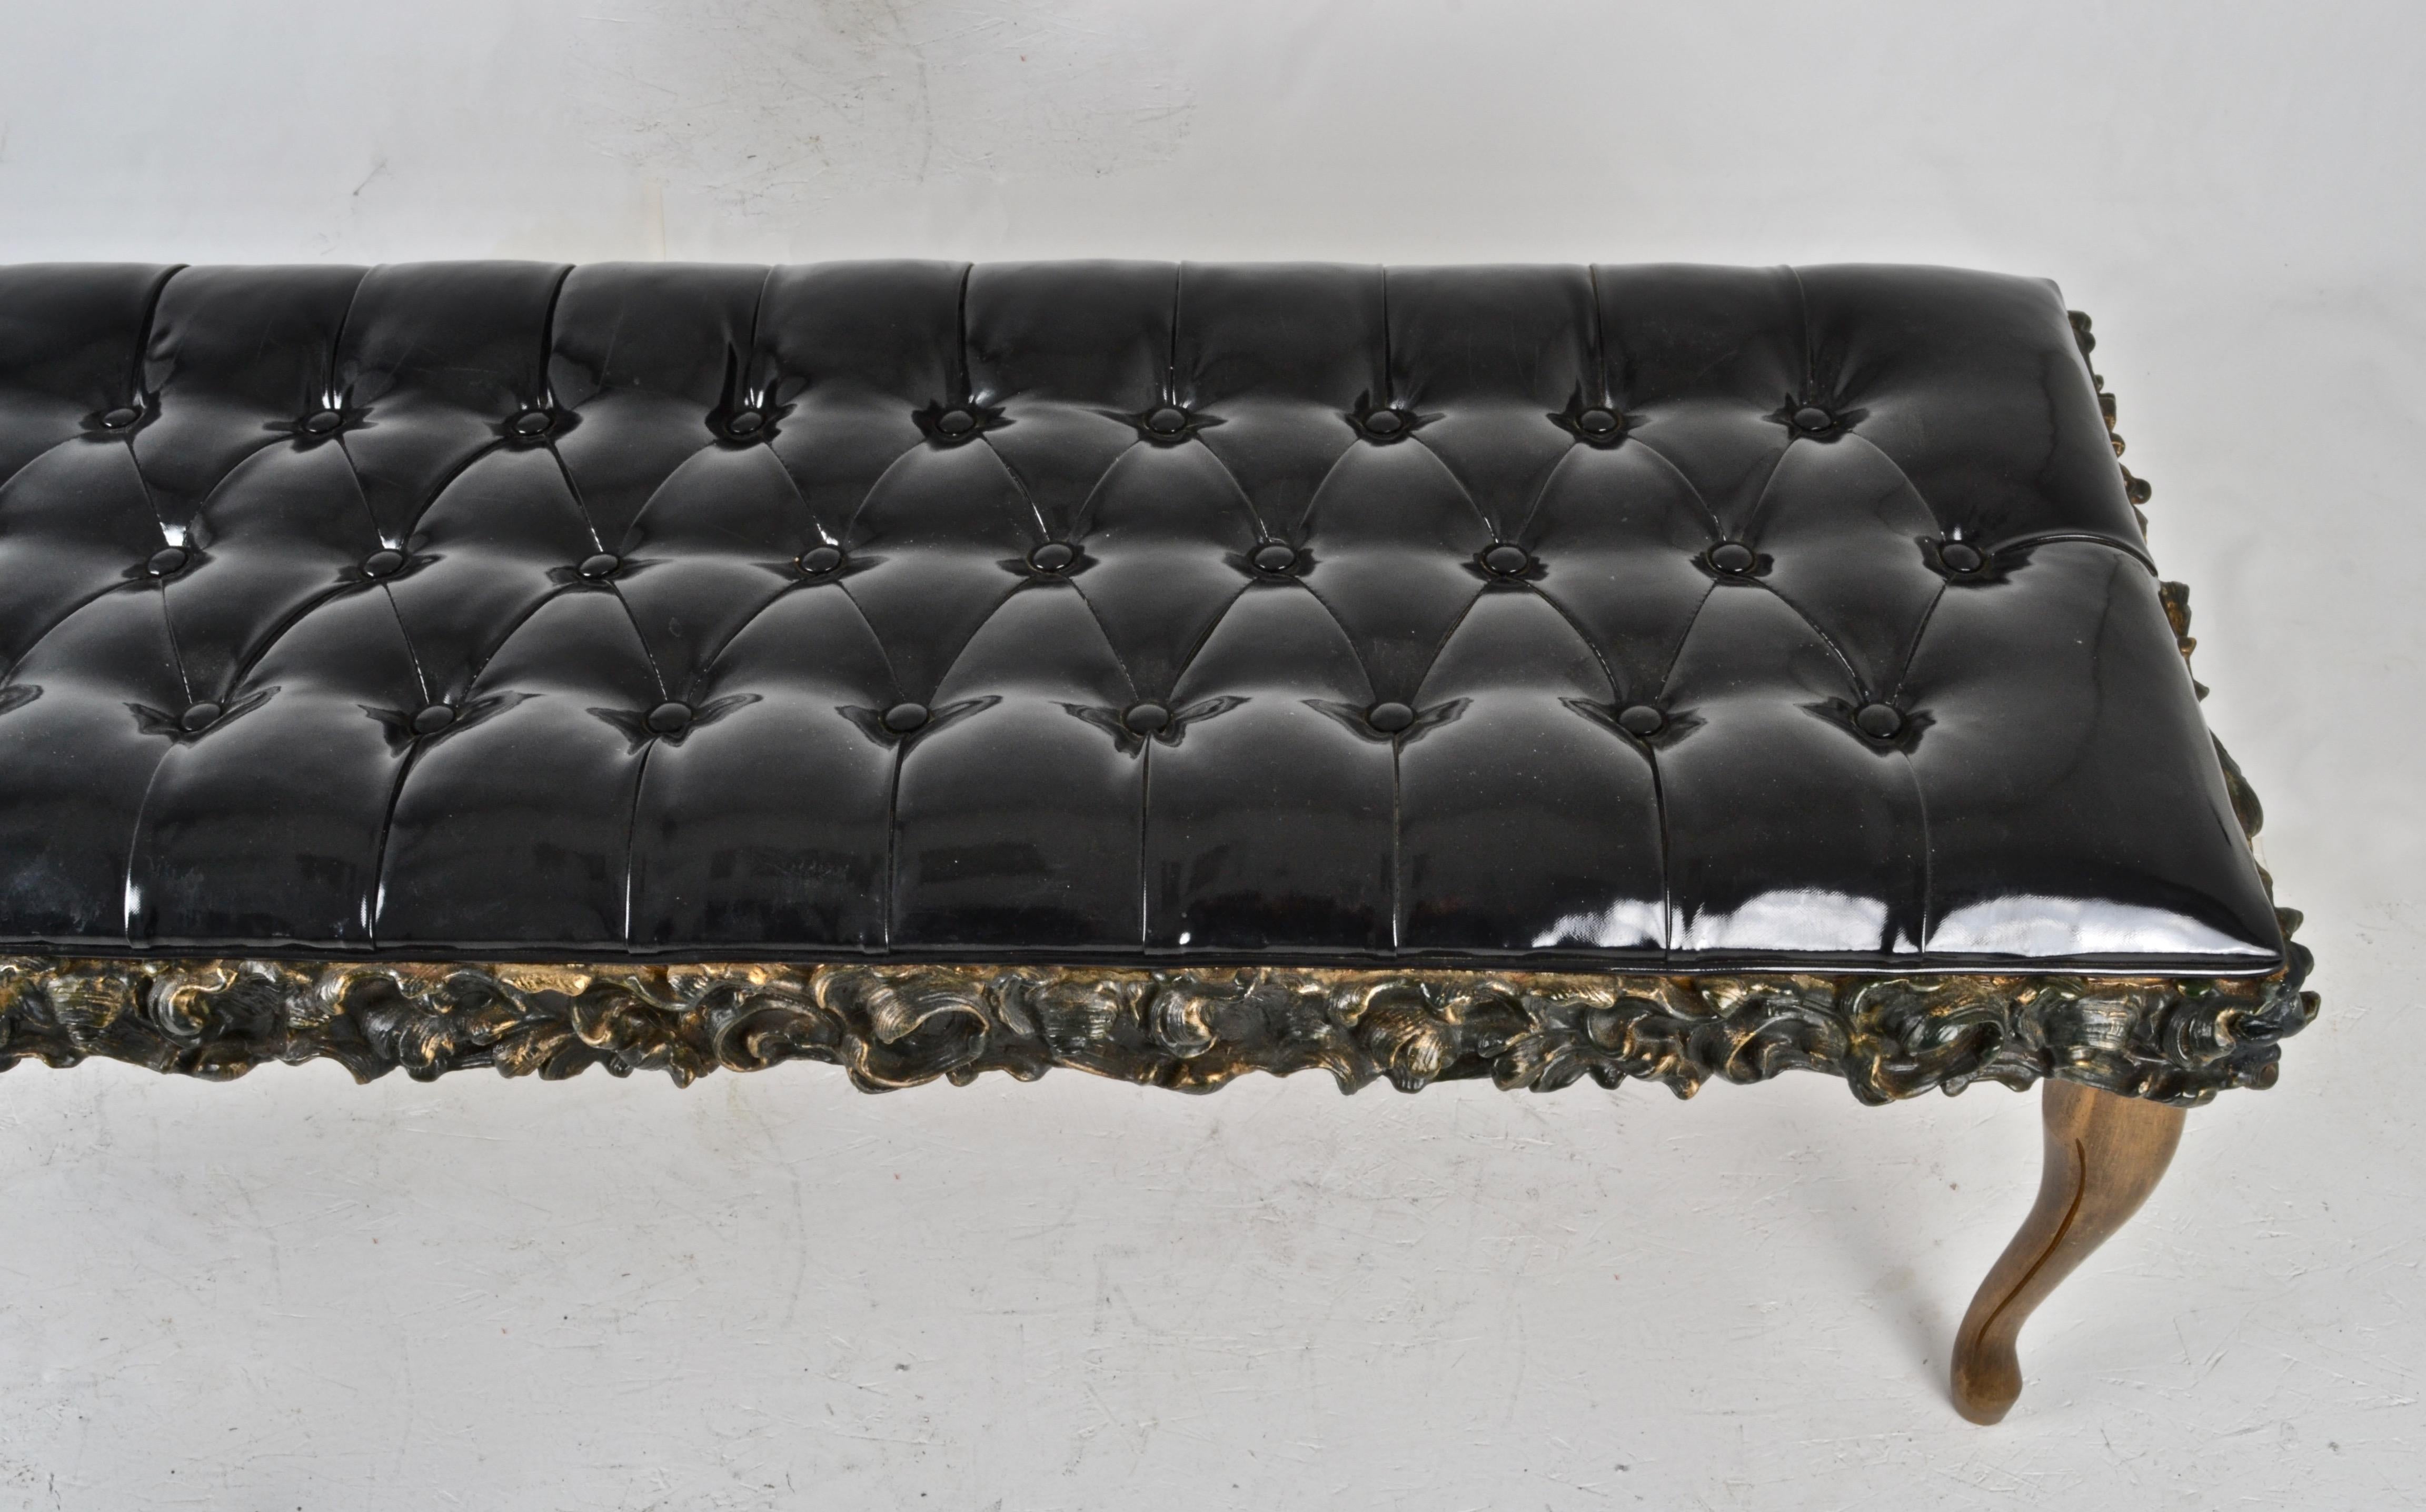 Tufted Bench with Figured Polychromed Base and Patent Leather Cover (Frühes 20. Jahrhundert)